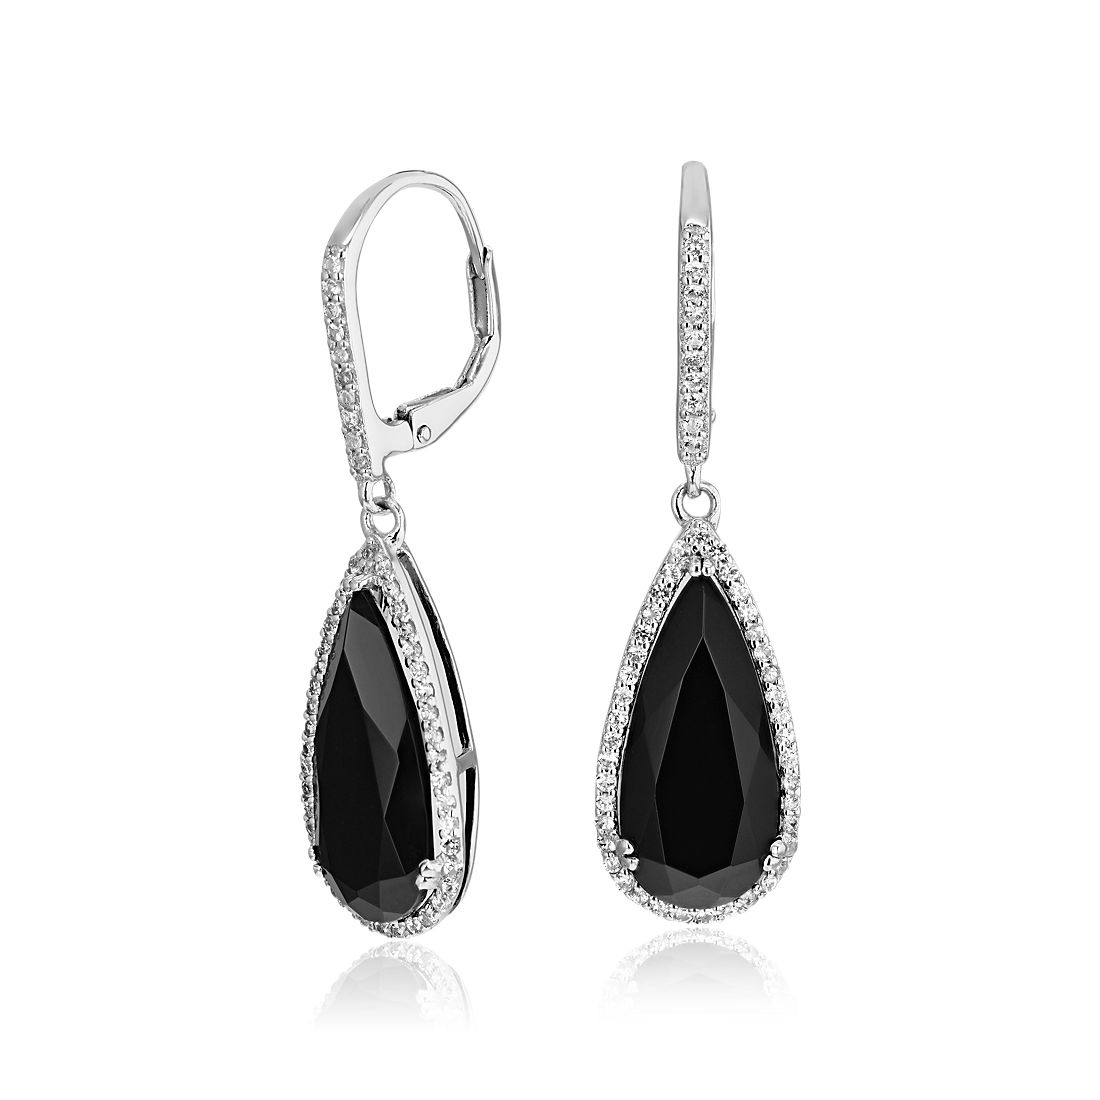 Pear-Shaped Black Onyx Drop Earrings with White Topaz Halo in Sterling Silver (18x8mm)